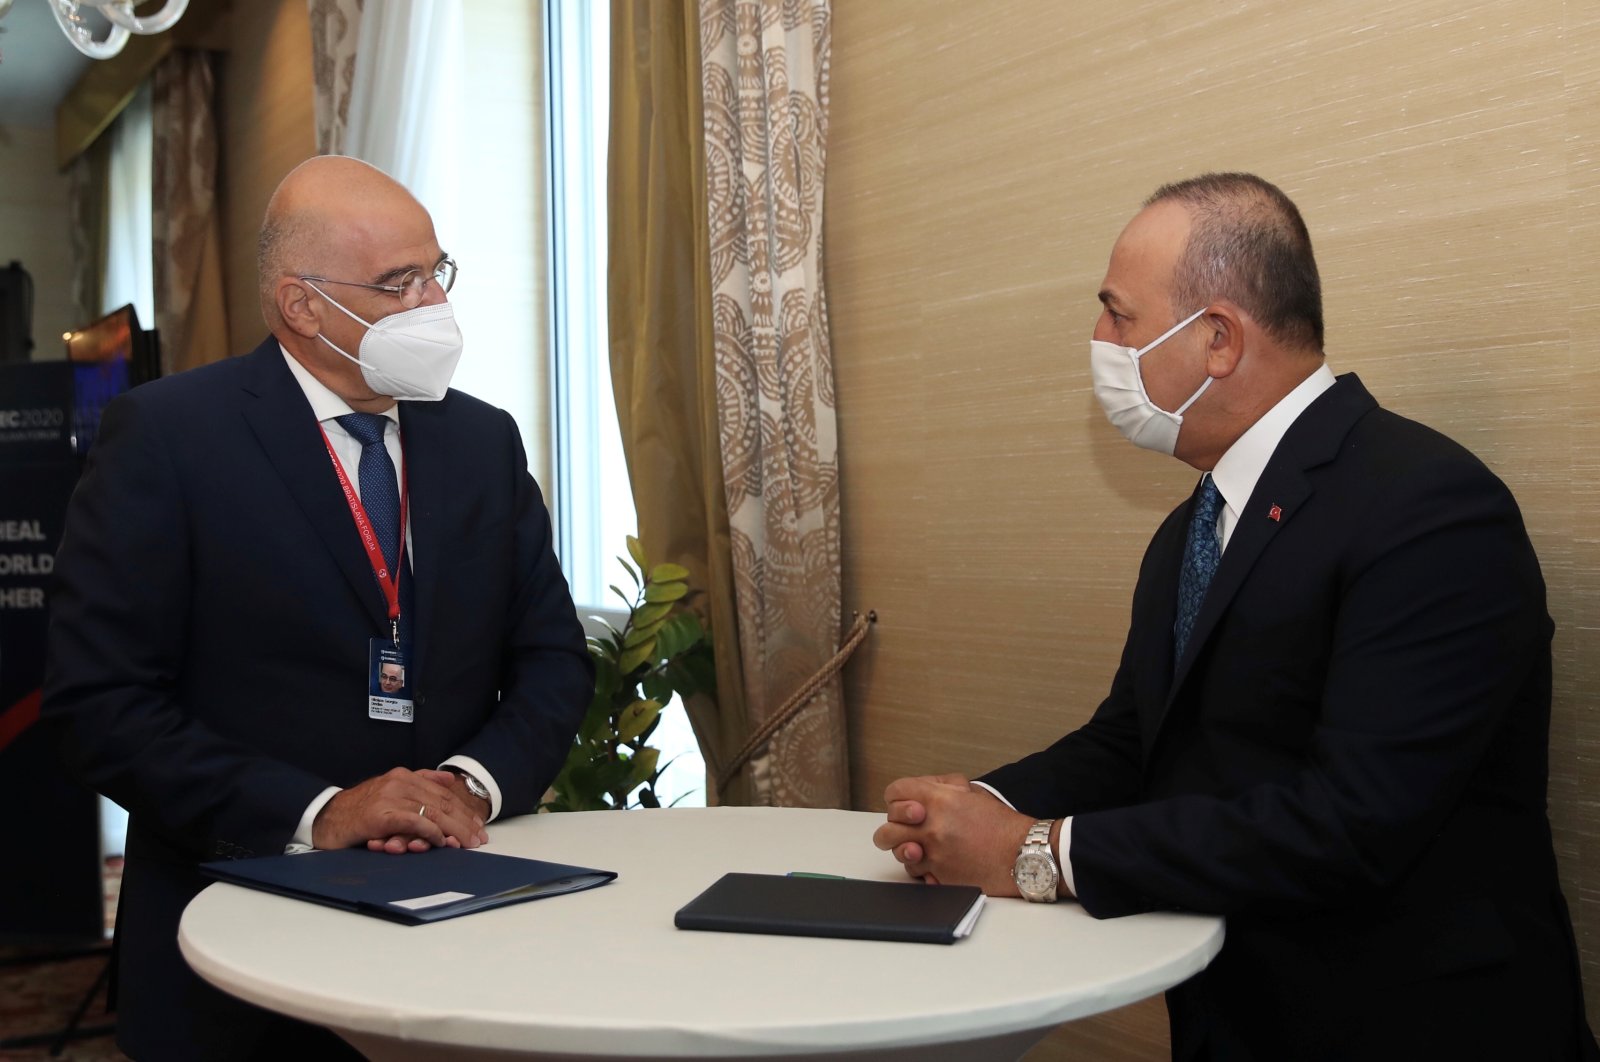 Foreign Minister Mevlüt Çavuşoğlu speaks with his Greek counterpart Nikos Dendias on the sidelines of the Global Security Forum in Bratislava, Slovakia, Oct. 8, 2020. (Turkish Foreign Ministry handout)